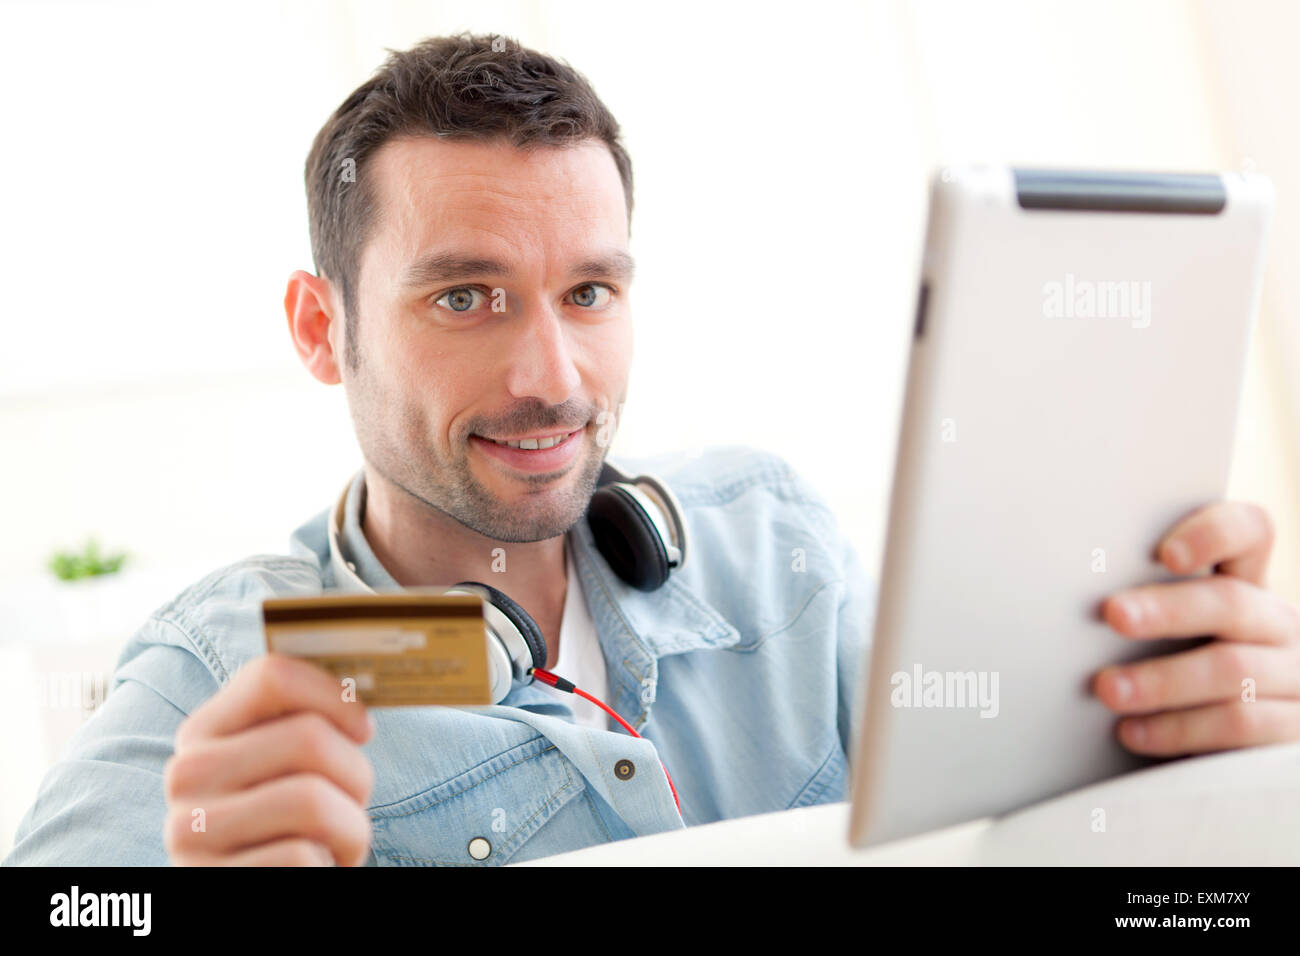 View of a Young relaxed man buying music on tablet Stock Photo